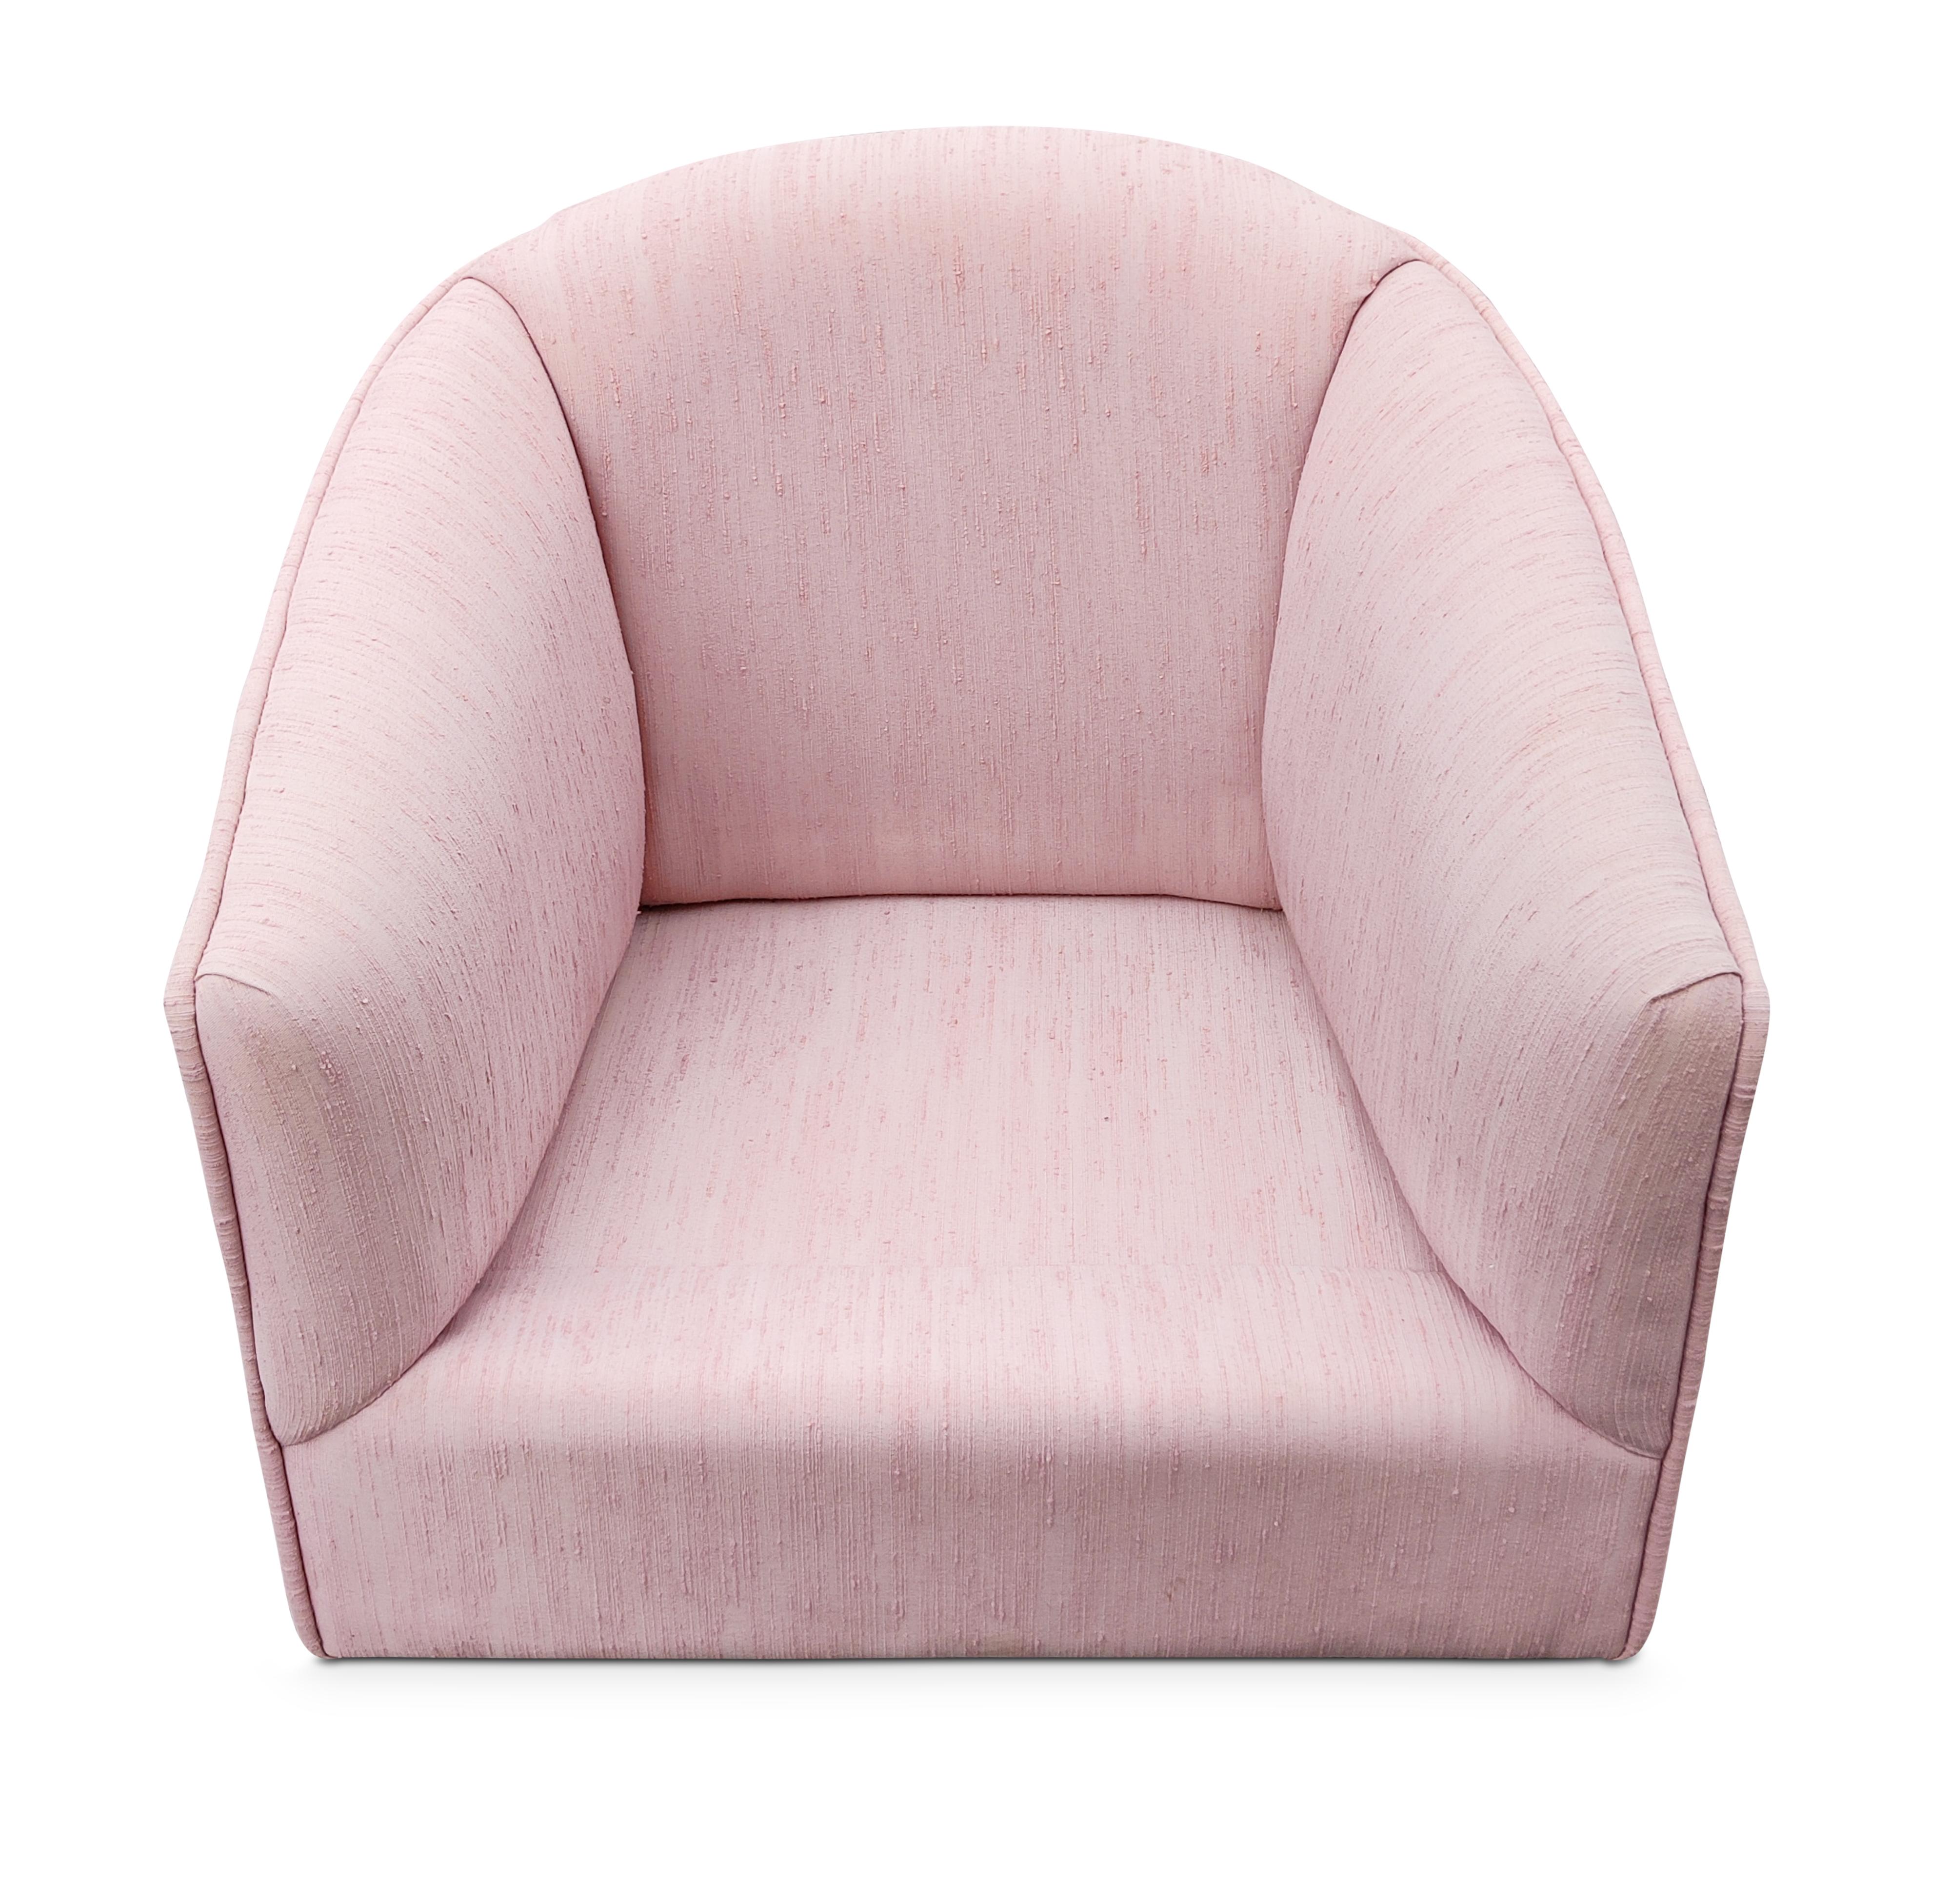 Upholstery Post-Modern Pair Barrel-Form Pink Upholstered Swivel Lounge Chairs 1980s